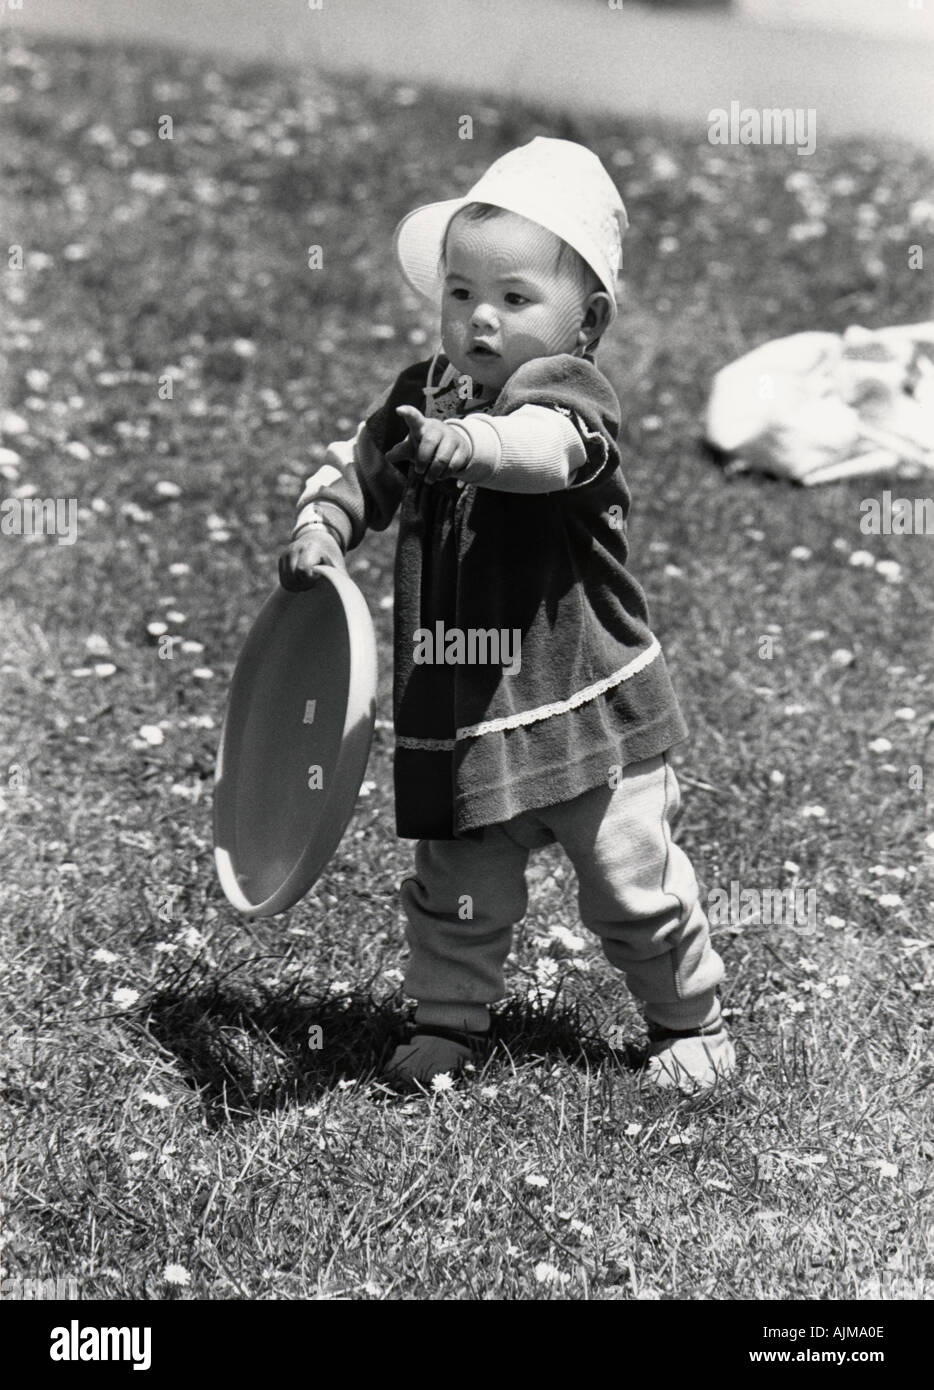 5318 18 fourteen month old girl pointing as she holds frisbee in a park San Francisco California USA Stock Photo